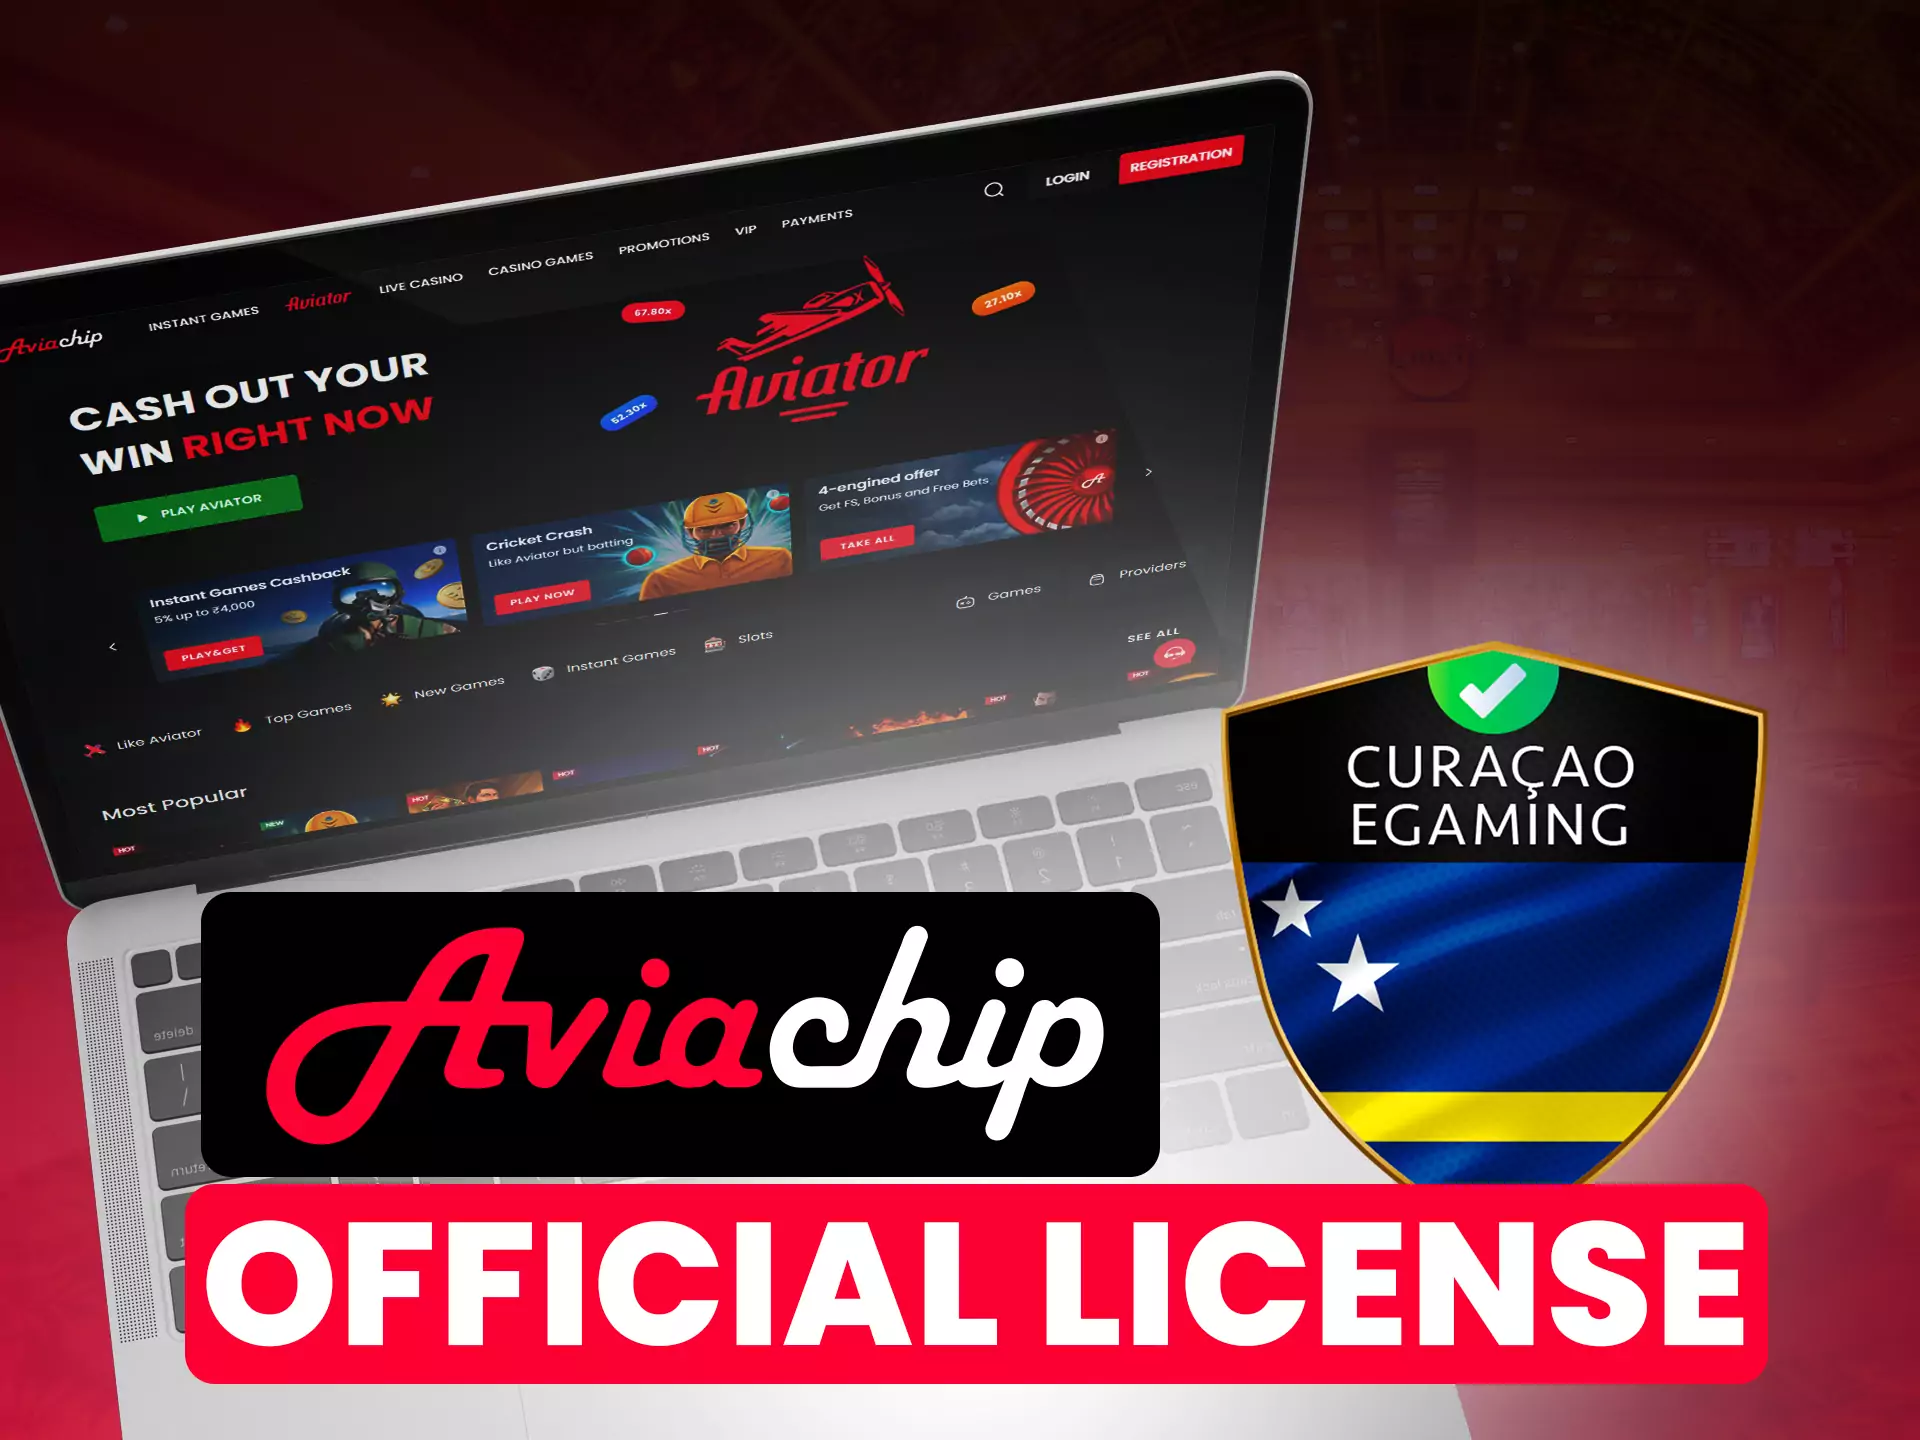 Aviachip is officially licensed and safe for players.